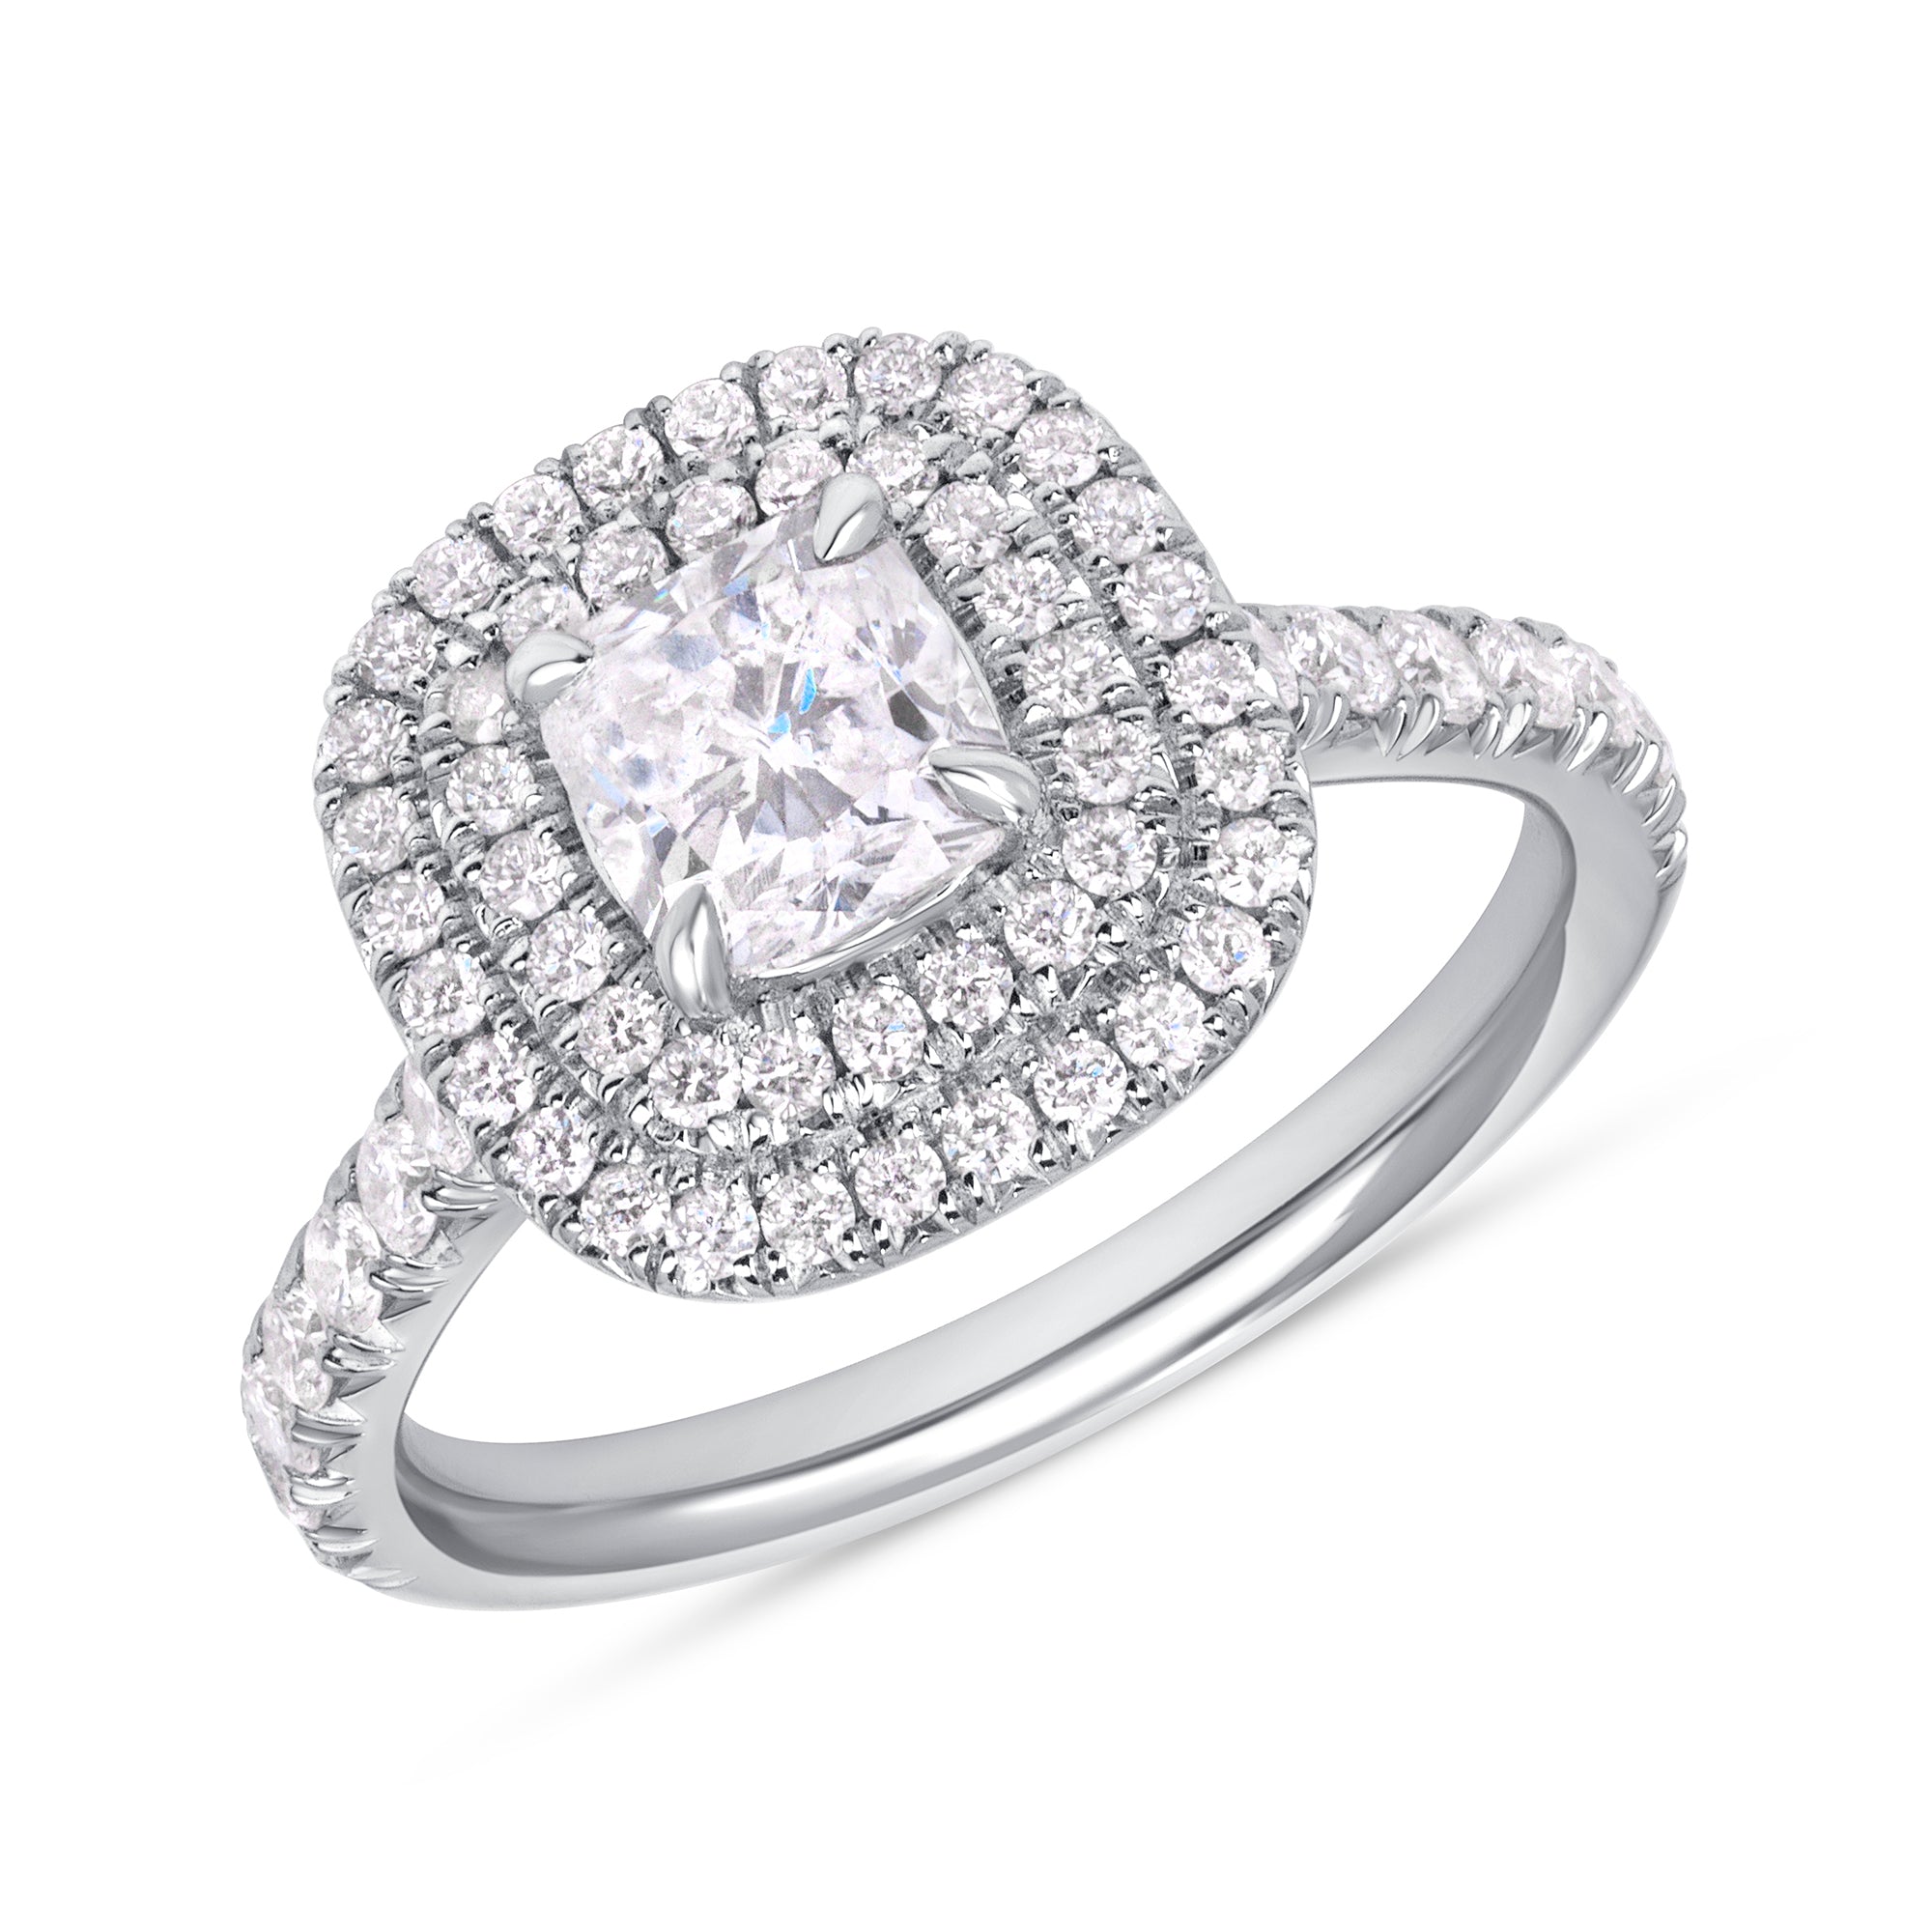 1.76ctw Cushion Cut Double Halo Diamond Cluster Ring in 14K White Gold